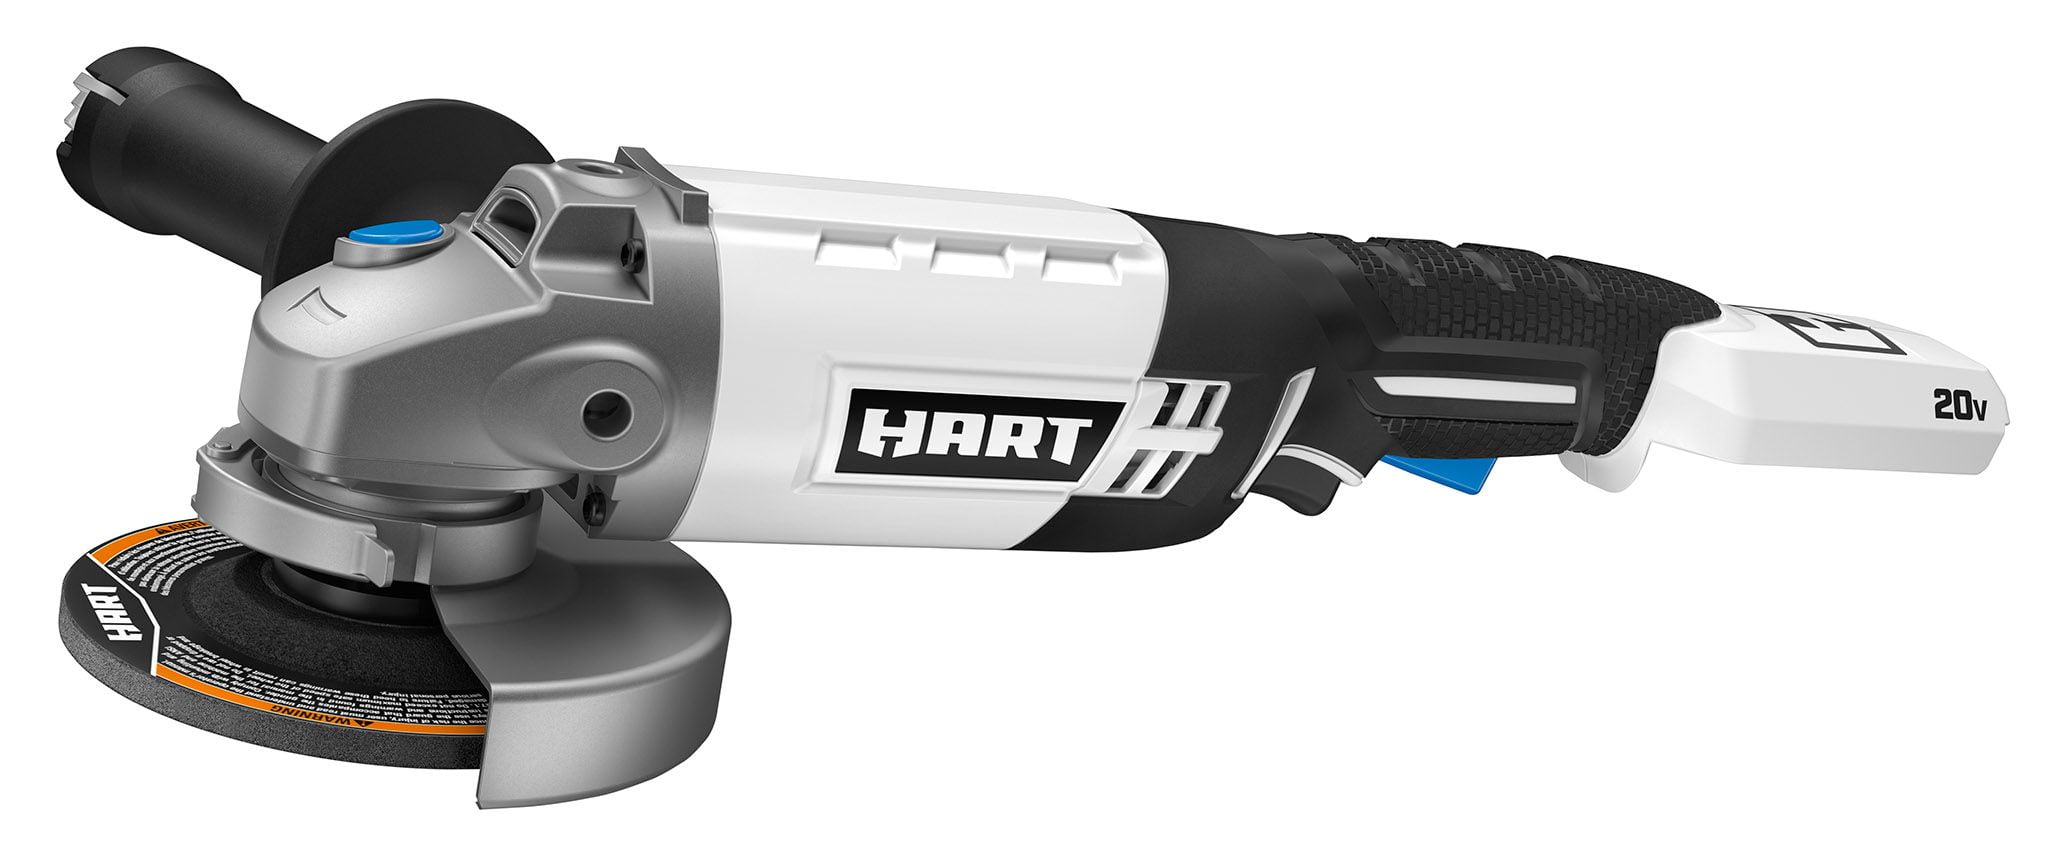 Hart HPAG01 20V 4-1/2 Cordless Angle Grinder (Tool Only)